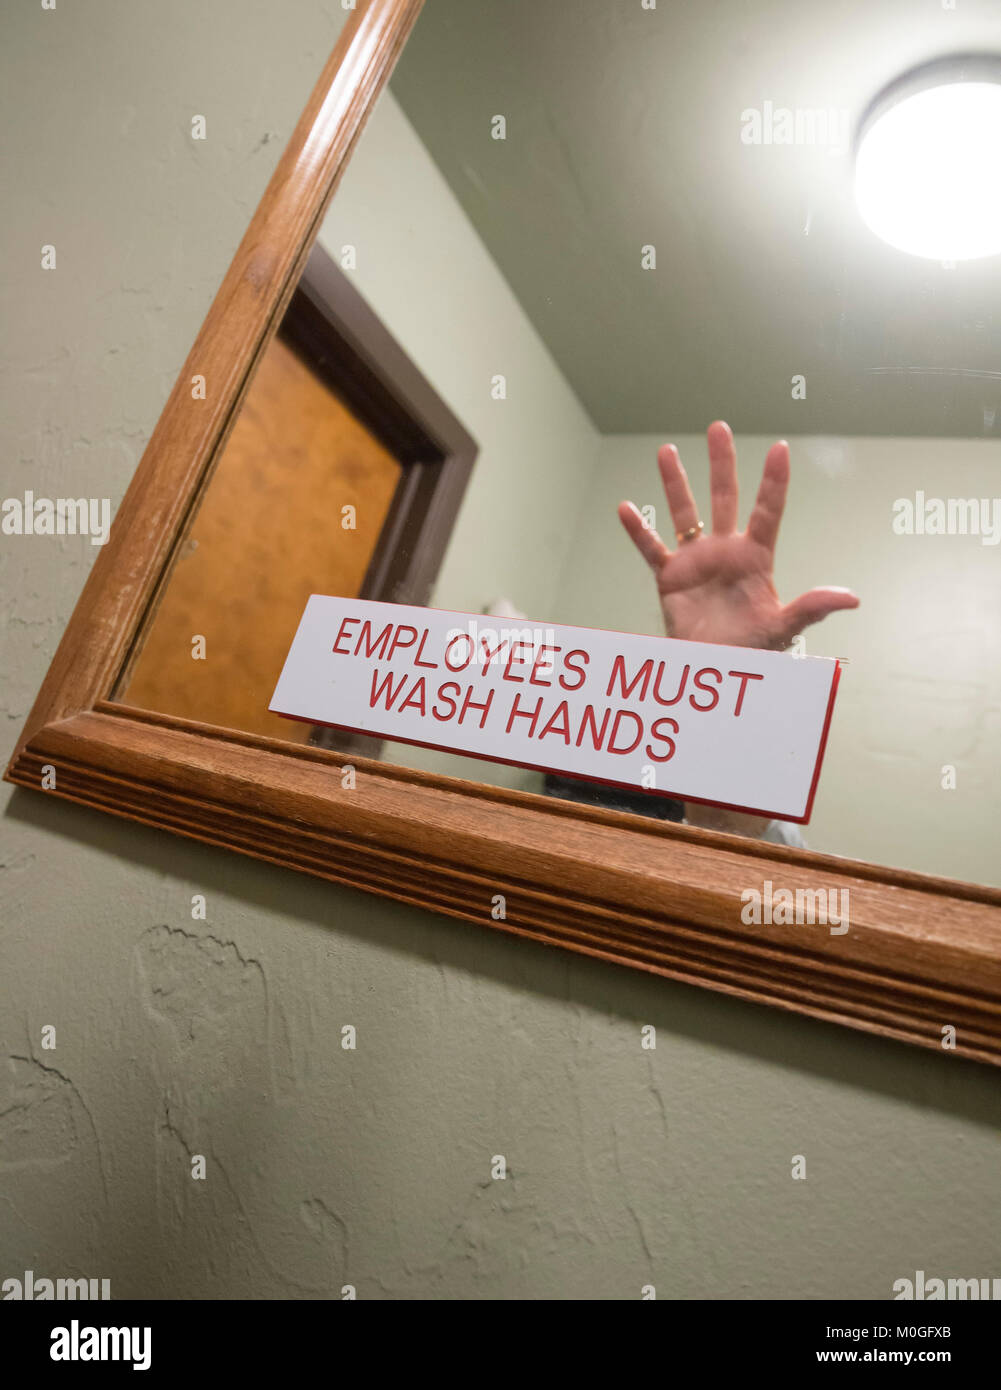 Employees must wash their hands sign on a restaurant bathroom mirror. Stock Photo